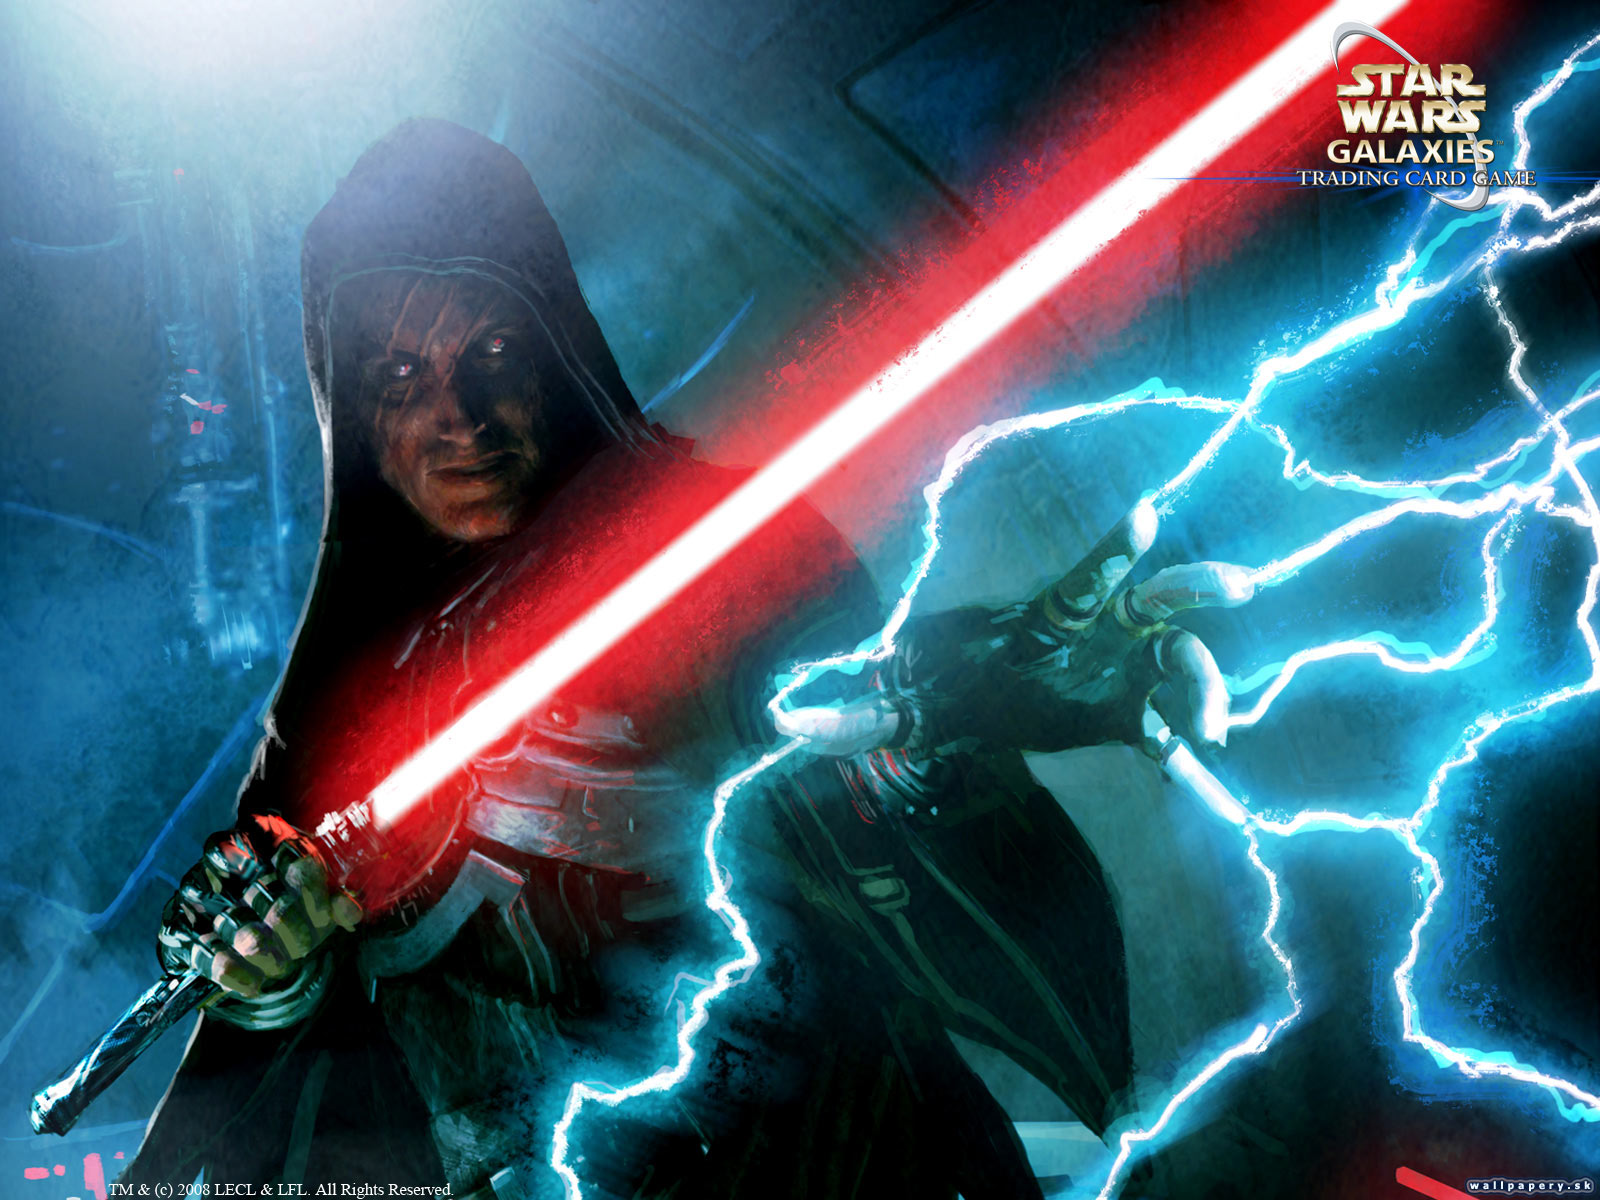 Star Wars Galaxies - Trading Card Game: Champions of the Force - wallpaper 11